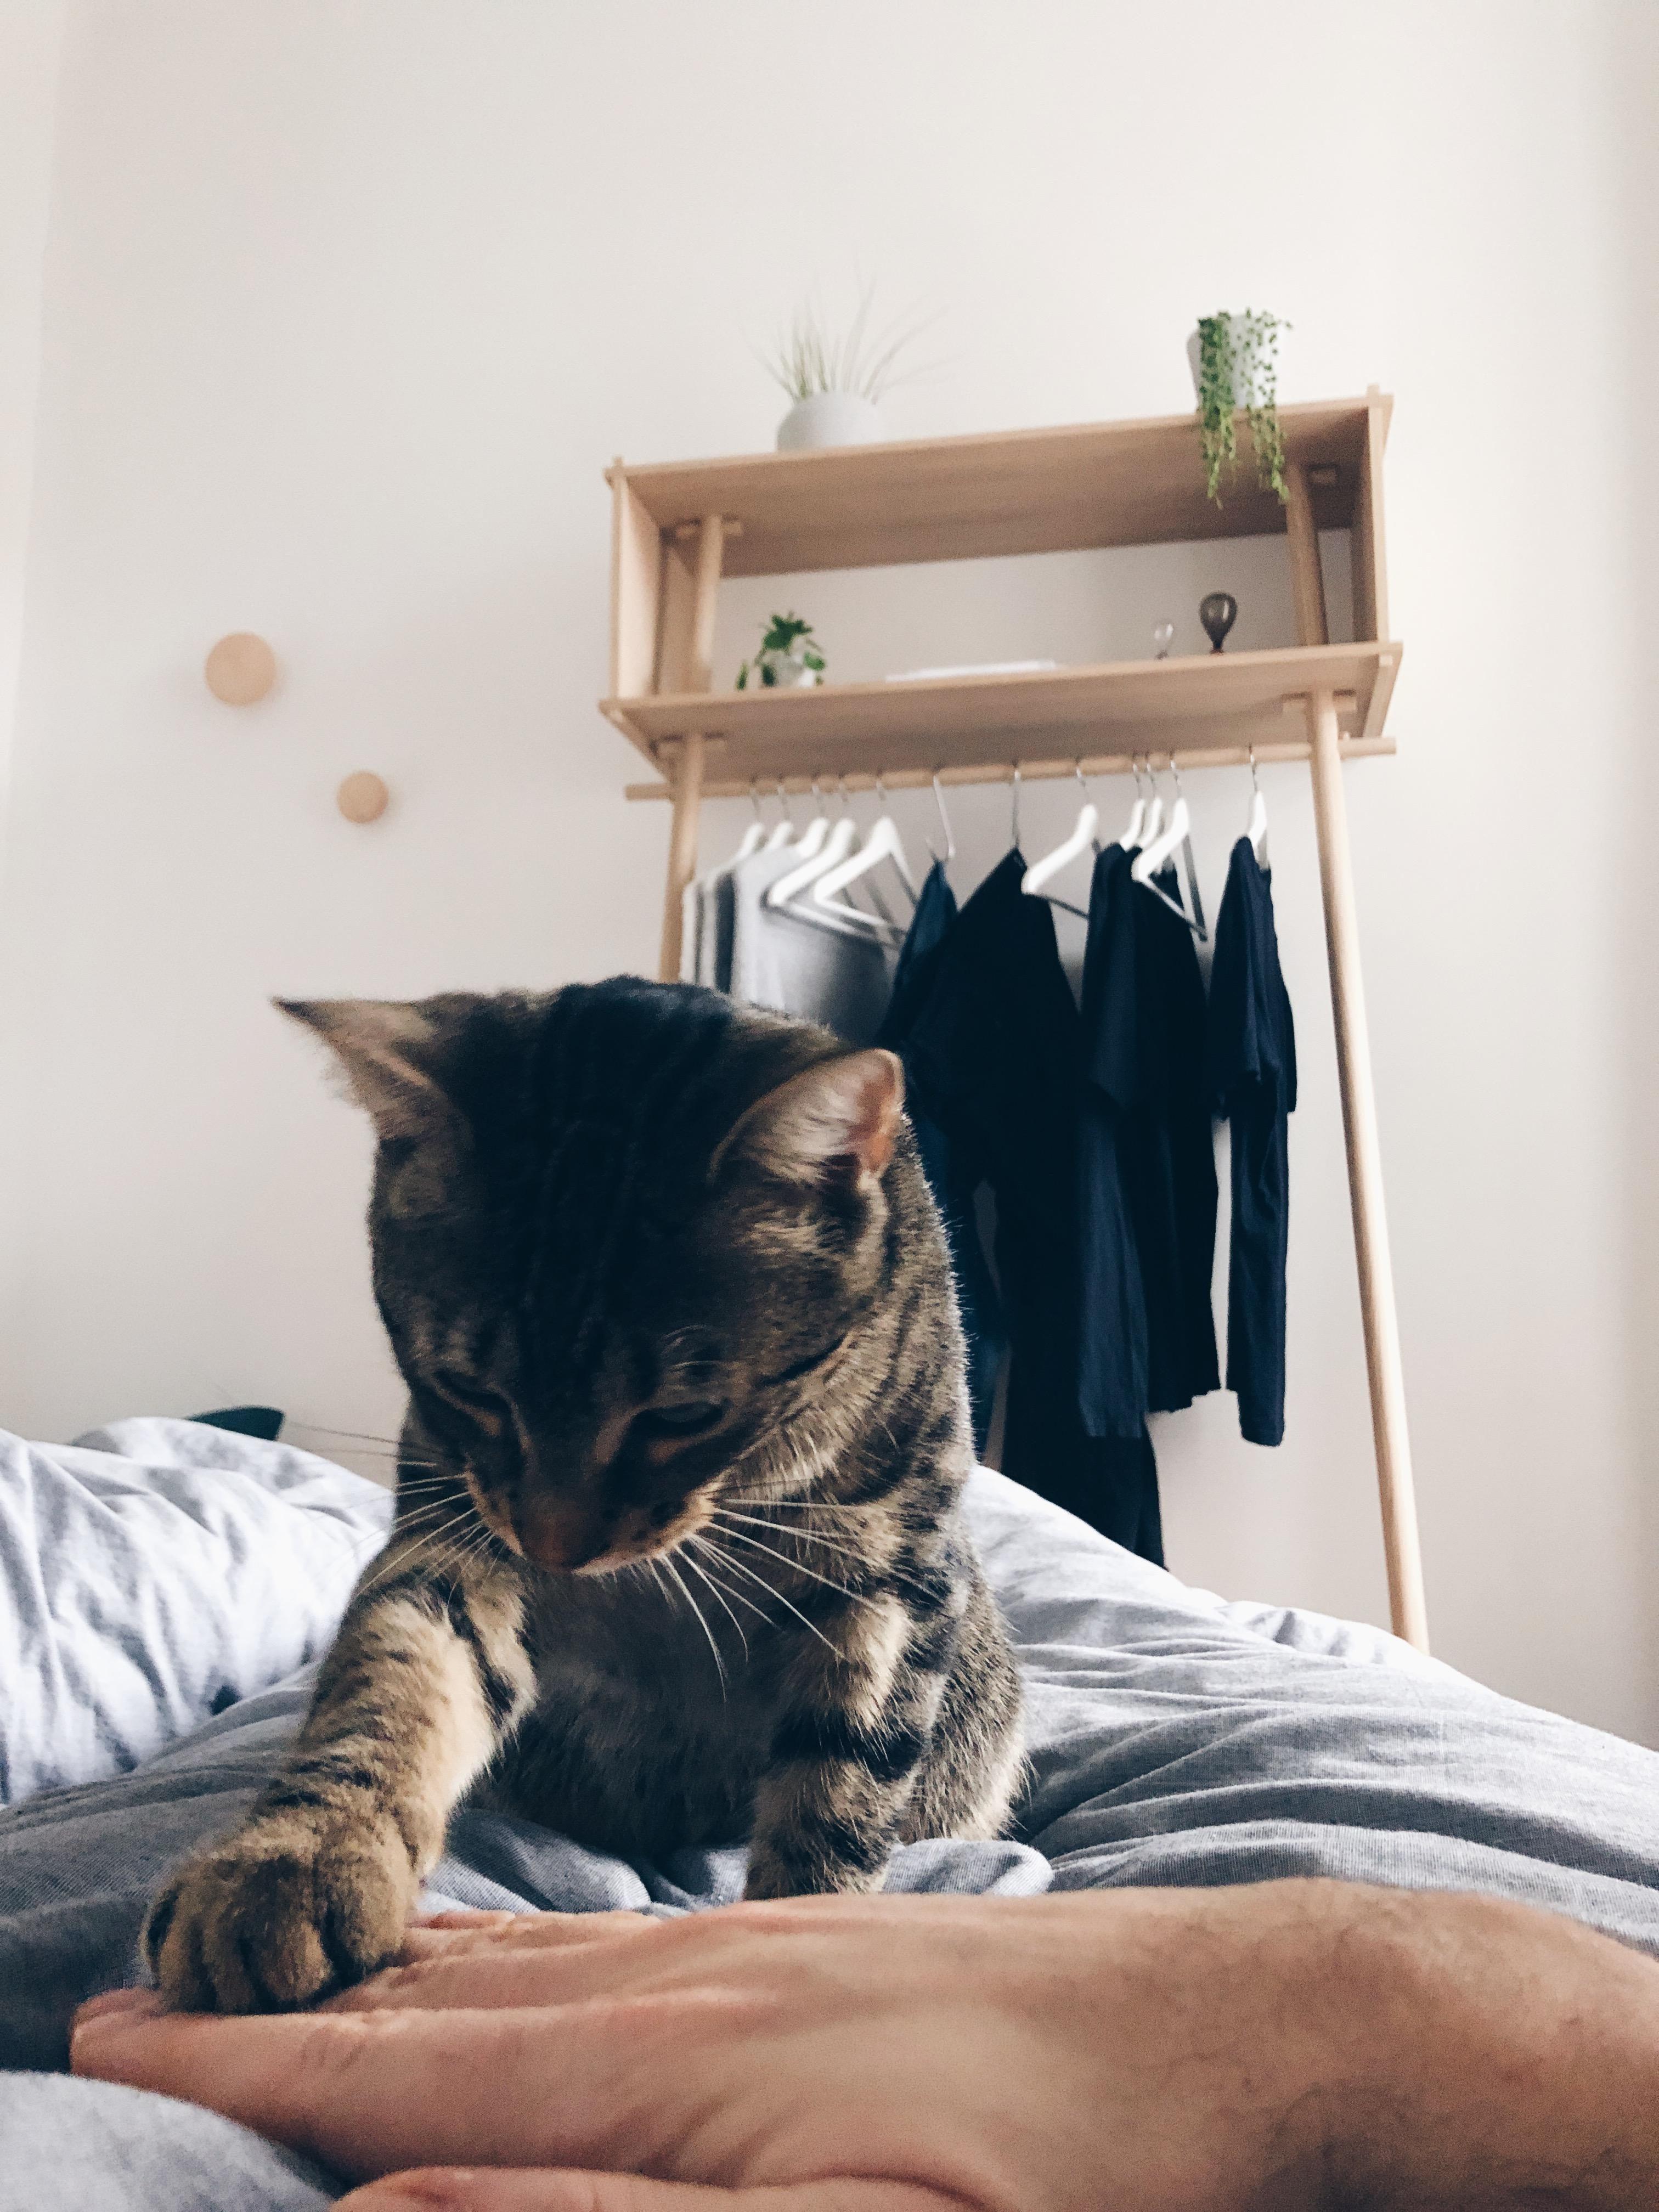 #goodmorning #bedview #bedroom #cat #caturday #cozyhome #wouddesign #interior